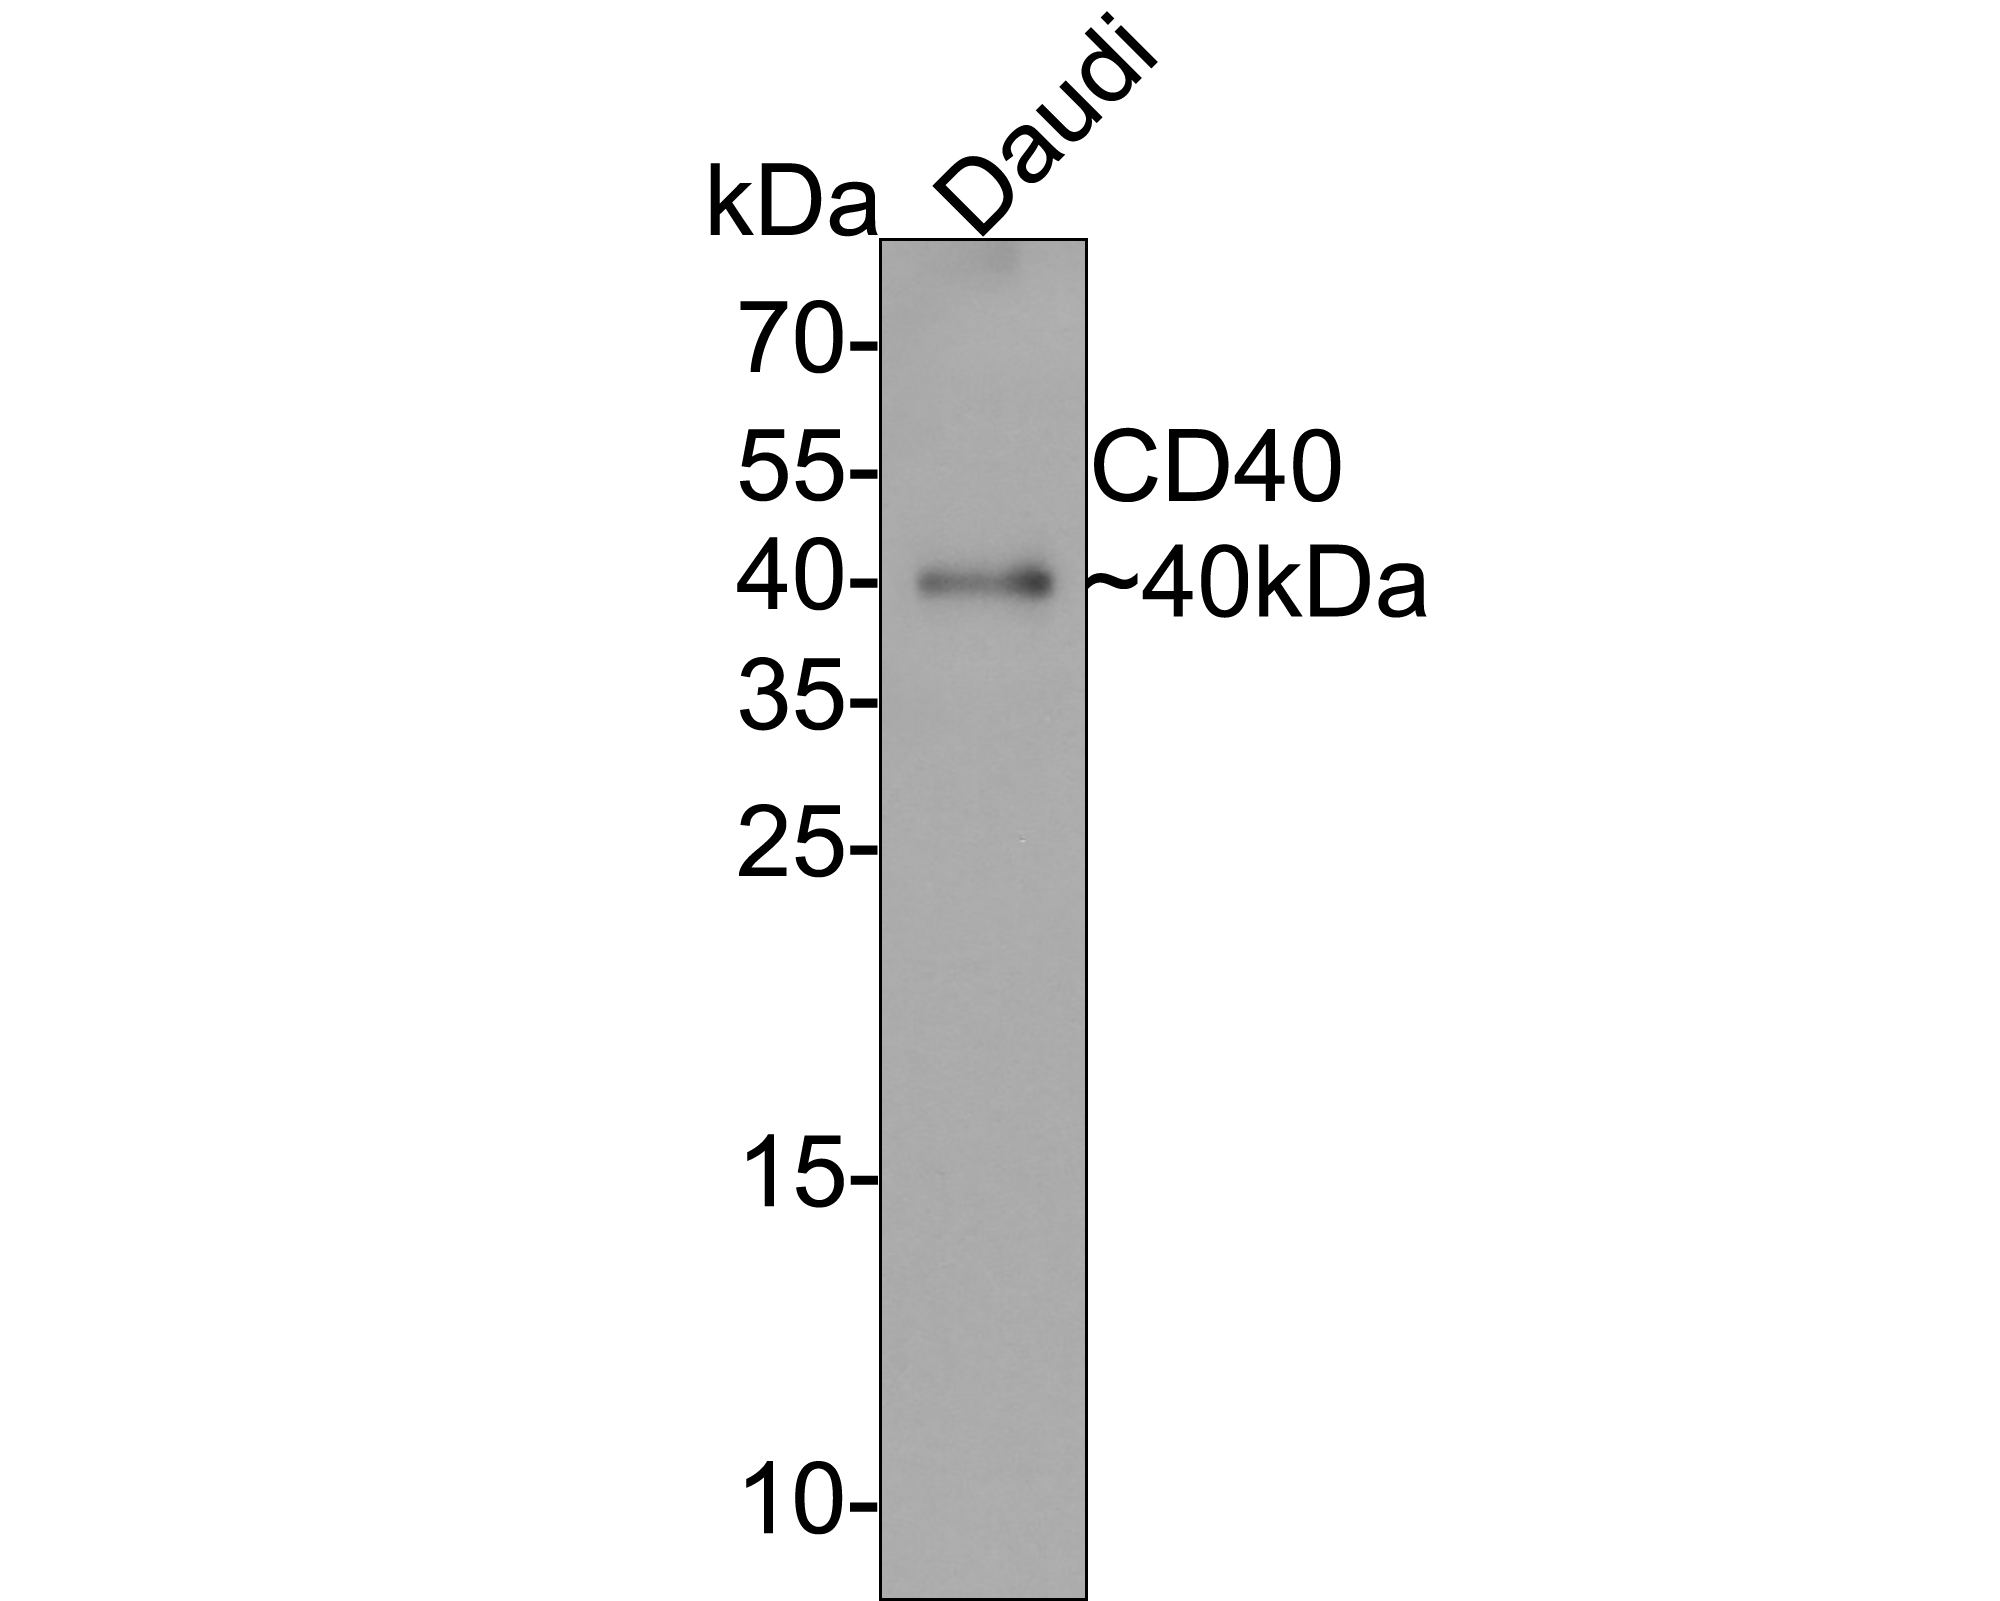 Western blot analysis of CD40 on Daudi cell lysates with Rabbit anti-CD40 antibody (ER1803-54) at 1/2,000 dilution.<br />
<br />
Lysates/proteins at 10 µg/Lane.<br />
<br />
Predicted band size: 31 kDa<br />
Observed band size: 40 kDa<br />
<br />
Exposure time: 1 minute;<br />
<br />
15% SDS-PAGE gel.<br />
<br />
Proteins were transferred to a PVDF membrane and blocked with 5% NFDM/TBST for 1 hour at room temperature. The primary antibody (ER1803-54) at 1/2,000 dilution was used in 5% NFDM/TBST at room temperature for 2 hours. Goat Anti-Rabbit IgG - HRP Secondary Antibody (HA1001) at 1:300,000 dilution was used for 1 hour at room temperature.